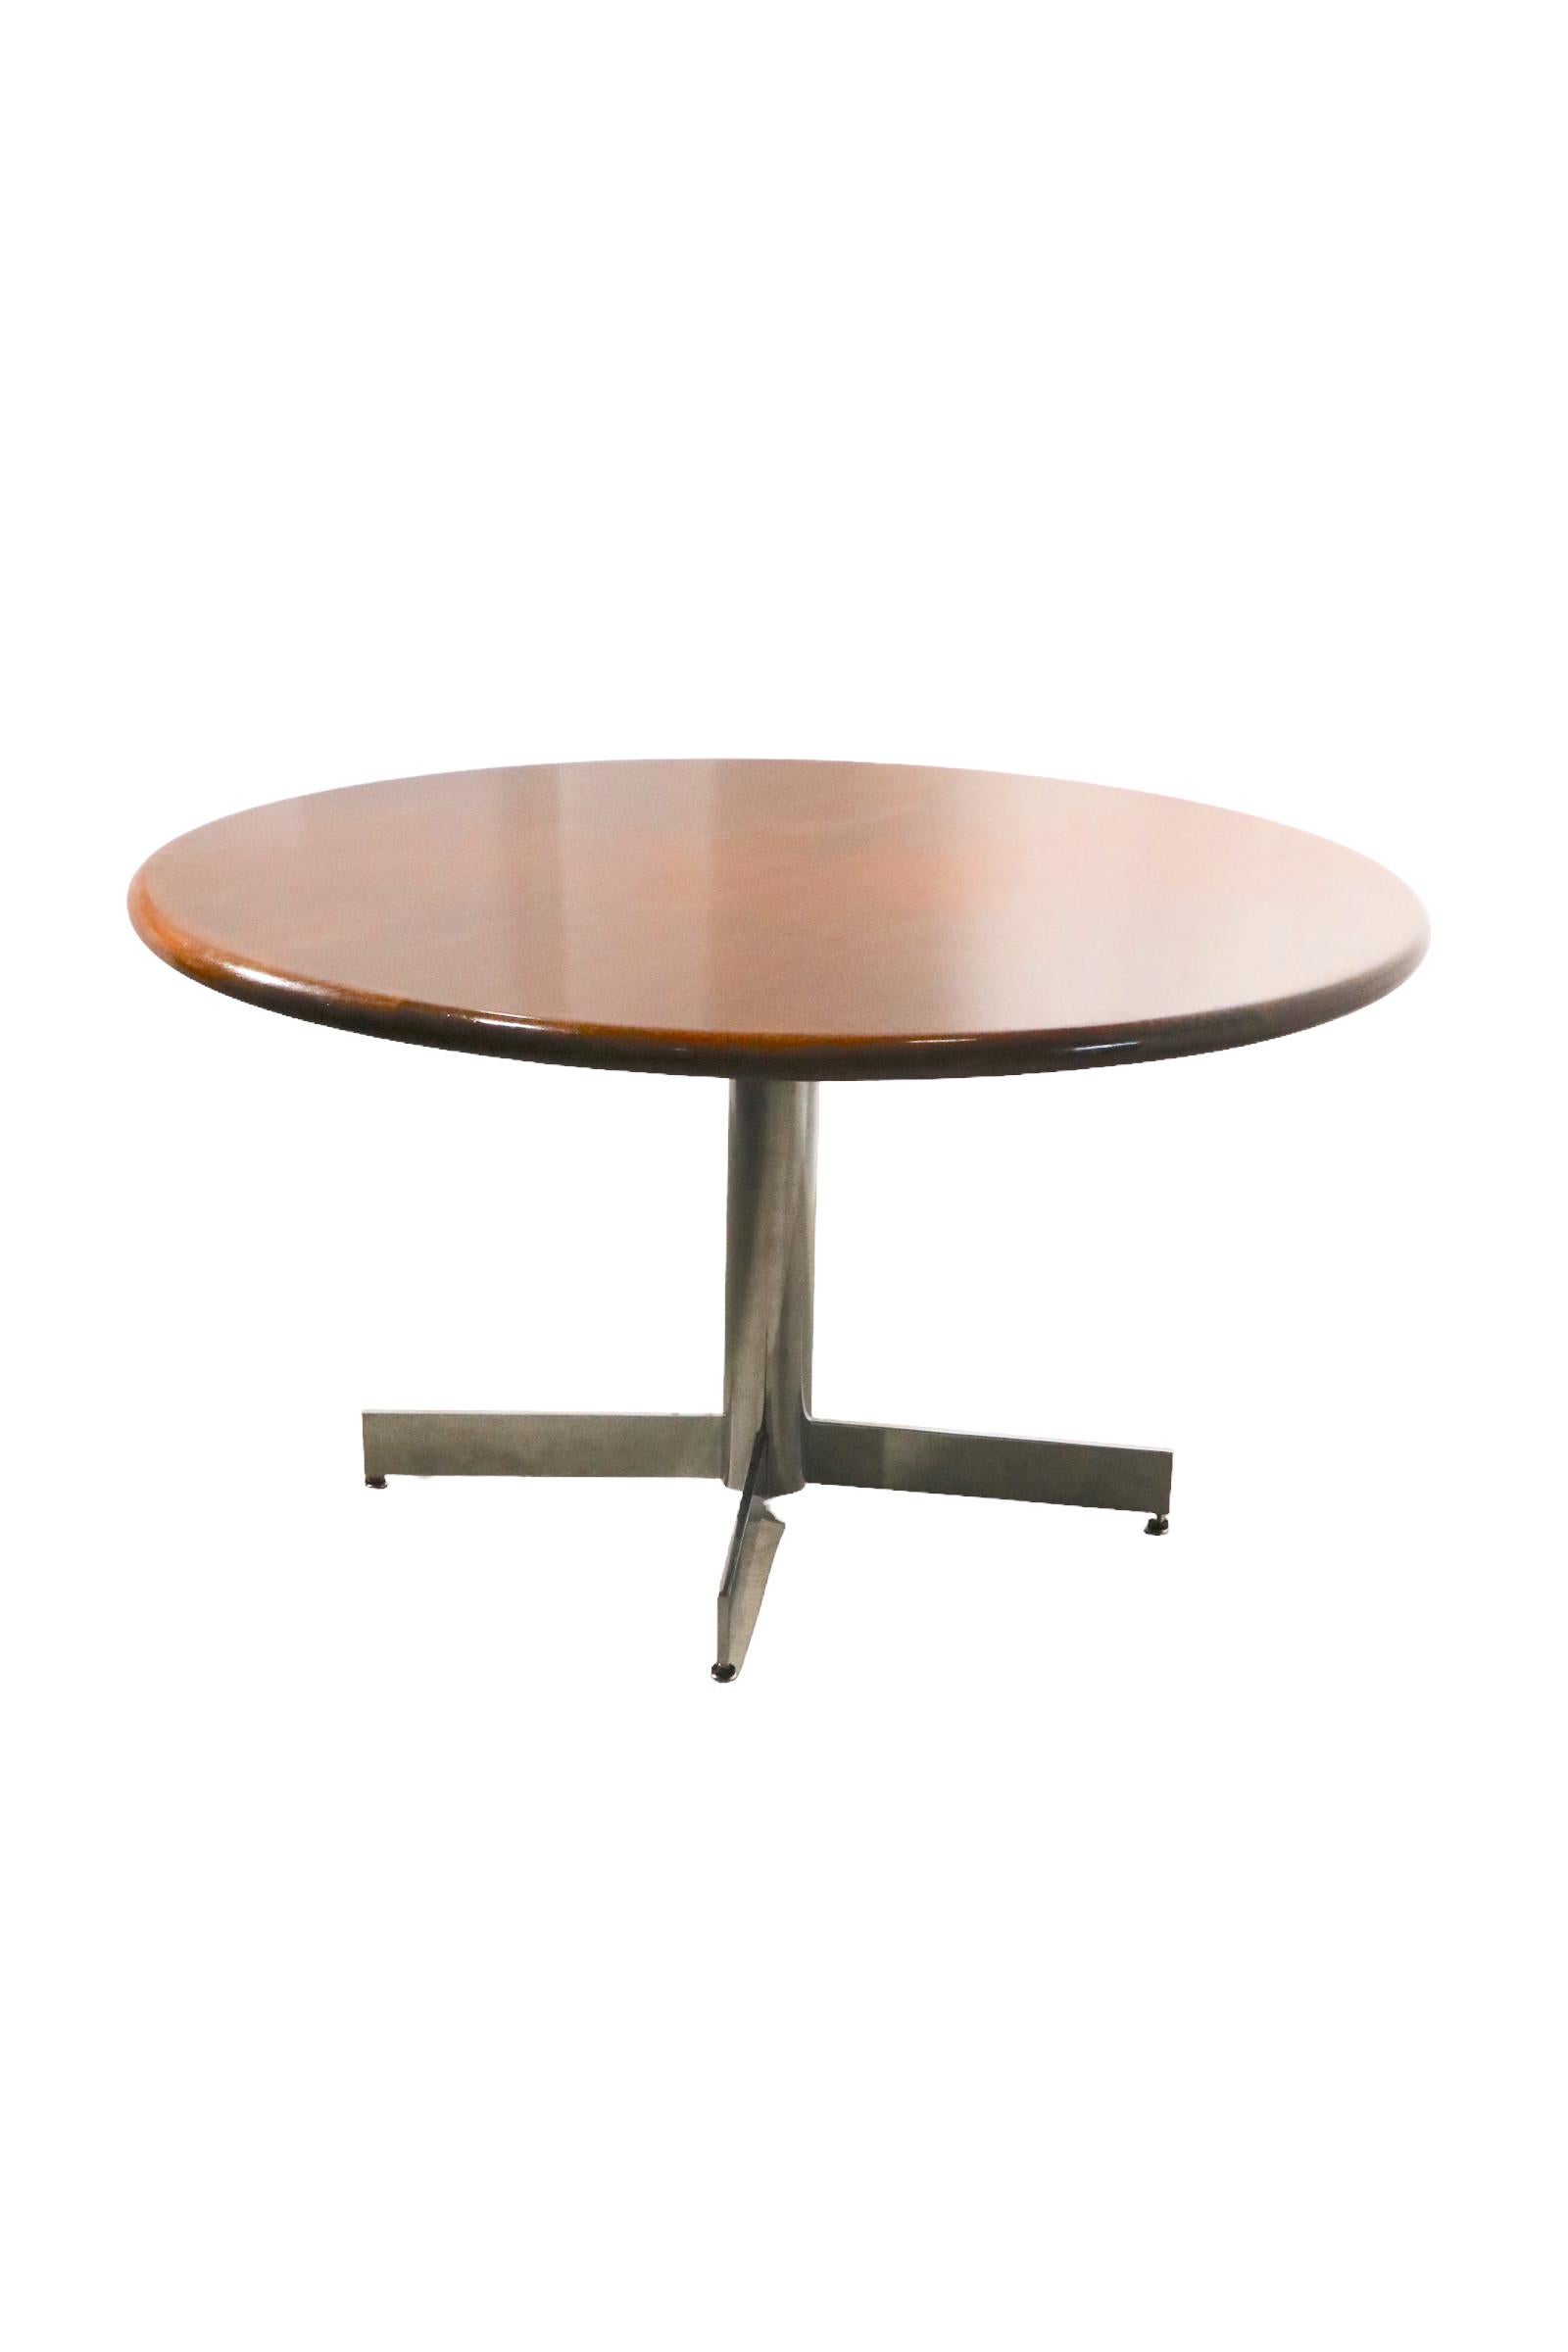 Mid Century Dining Conference Table with Round Solid Walnut Top on Chrome Base For Sale 7